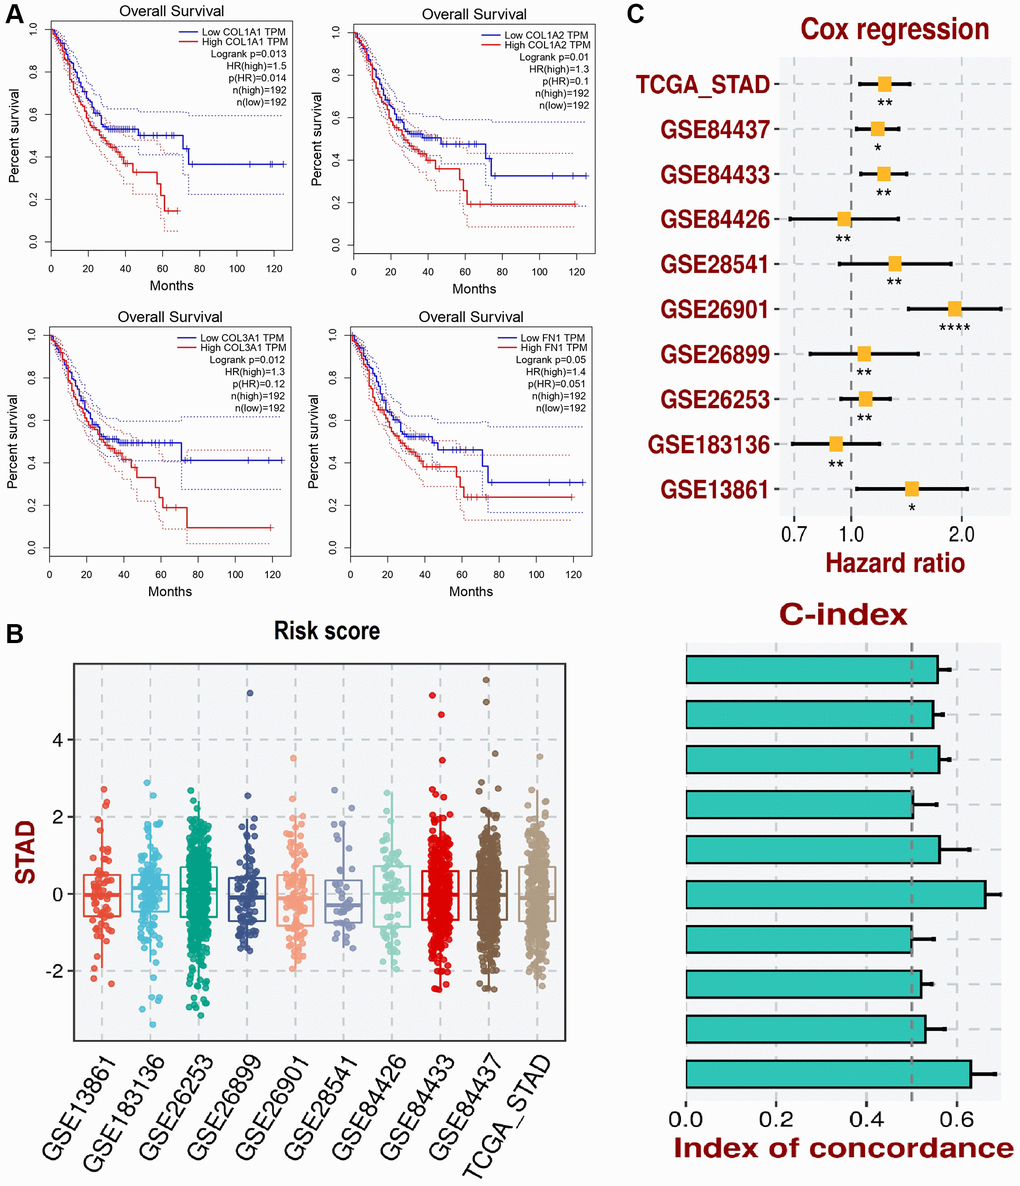 This figure illustrates the survival analysis and development of a prognostic model using the gene expression data of COL1A1, COL1A2, COL3A1, and FN1. (A) The survival analysis of these genes in gastric cancer (GC) patients is conducted via GEPIA. (B) Box plots representing the risk scores of patients in various GEO datasets and the TCGA